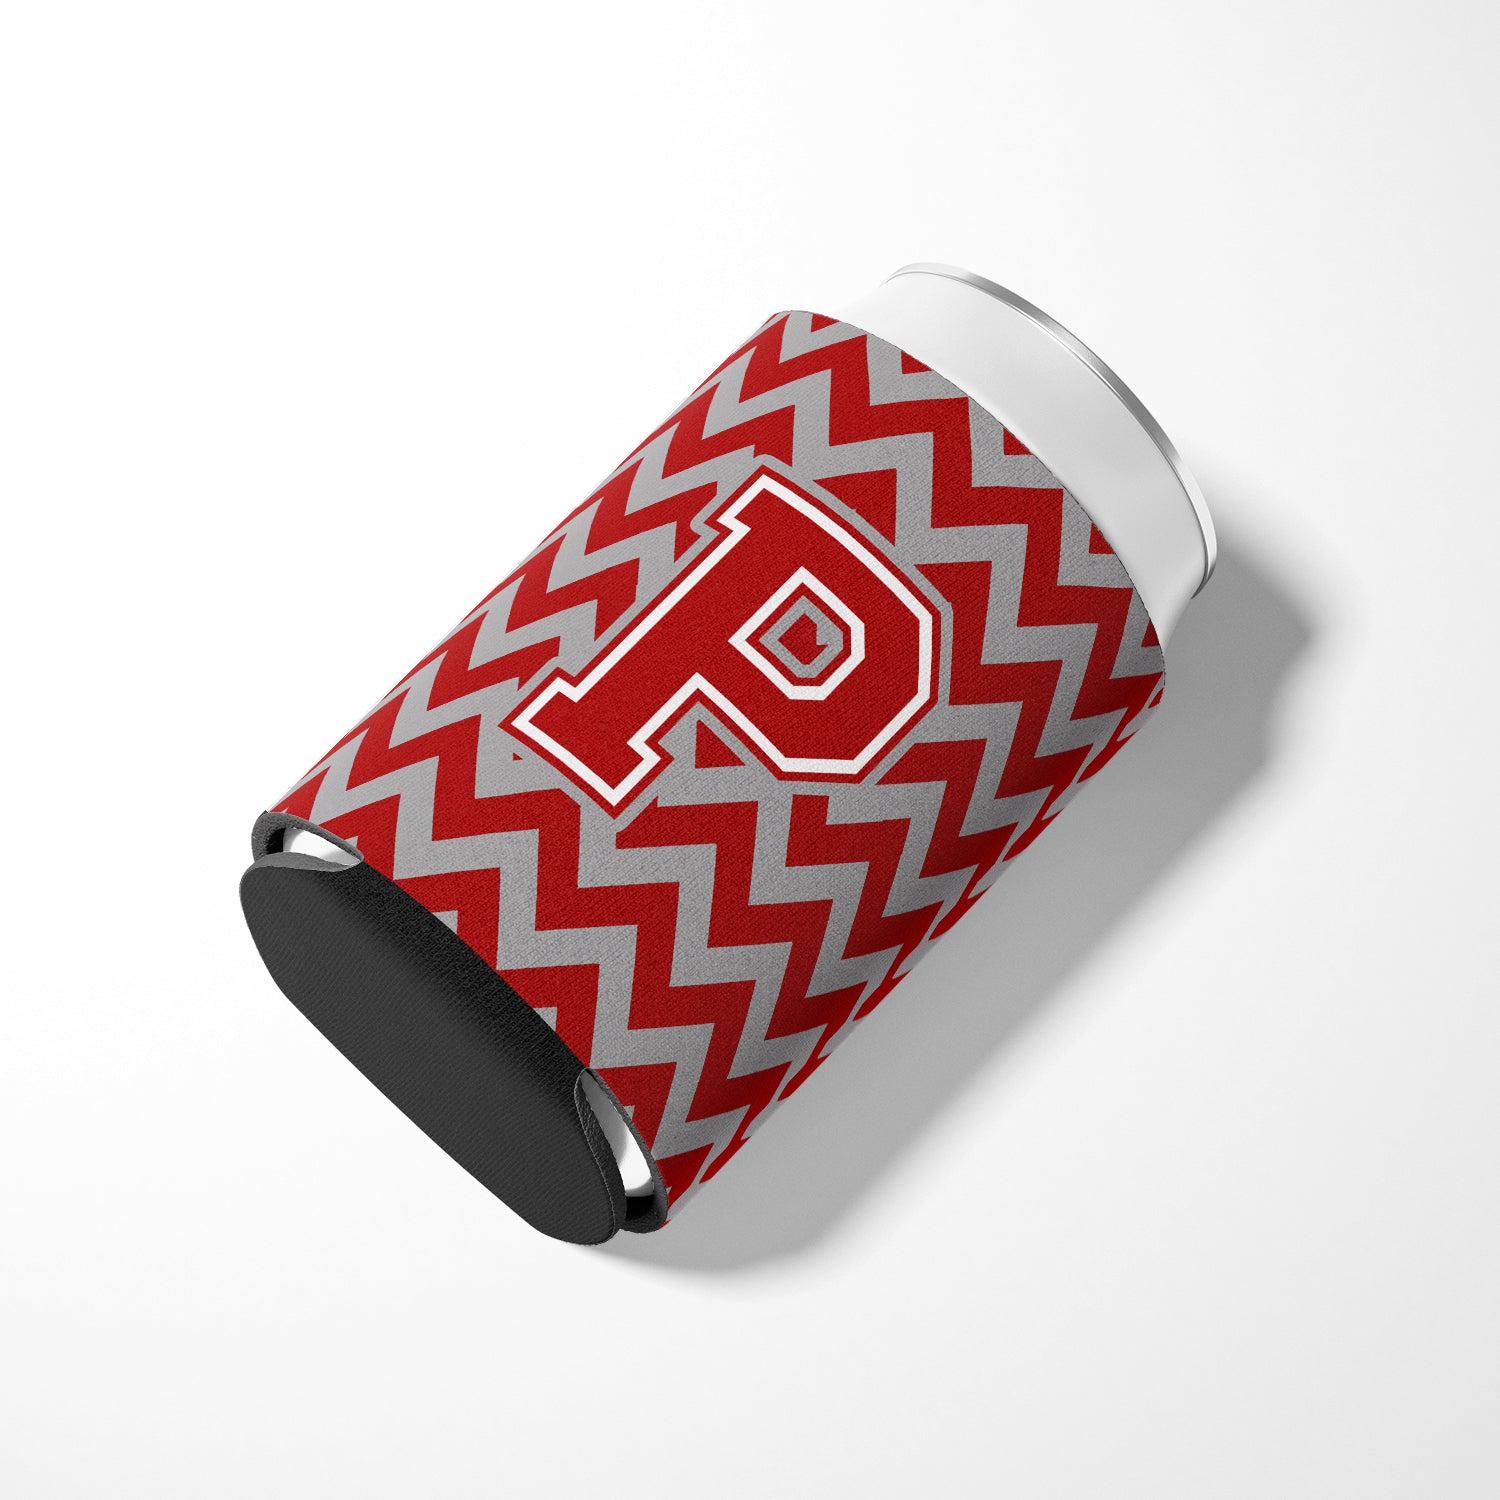 Letter P Chevron Maroon and White Can or Bottle Hugger CJ1049-PCC